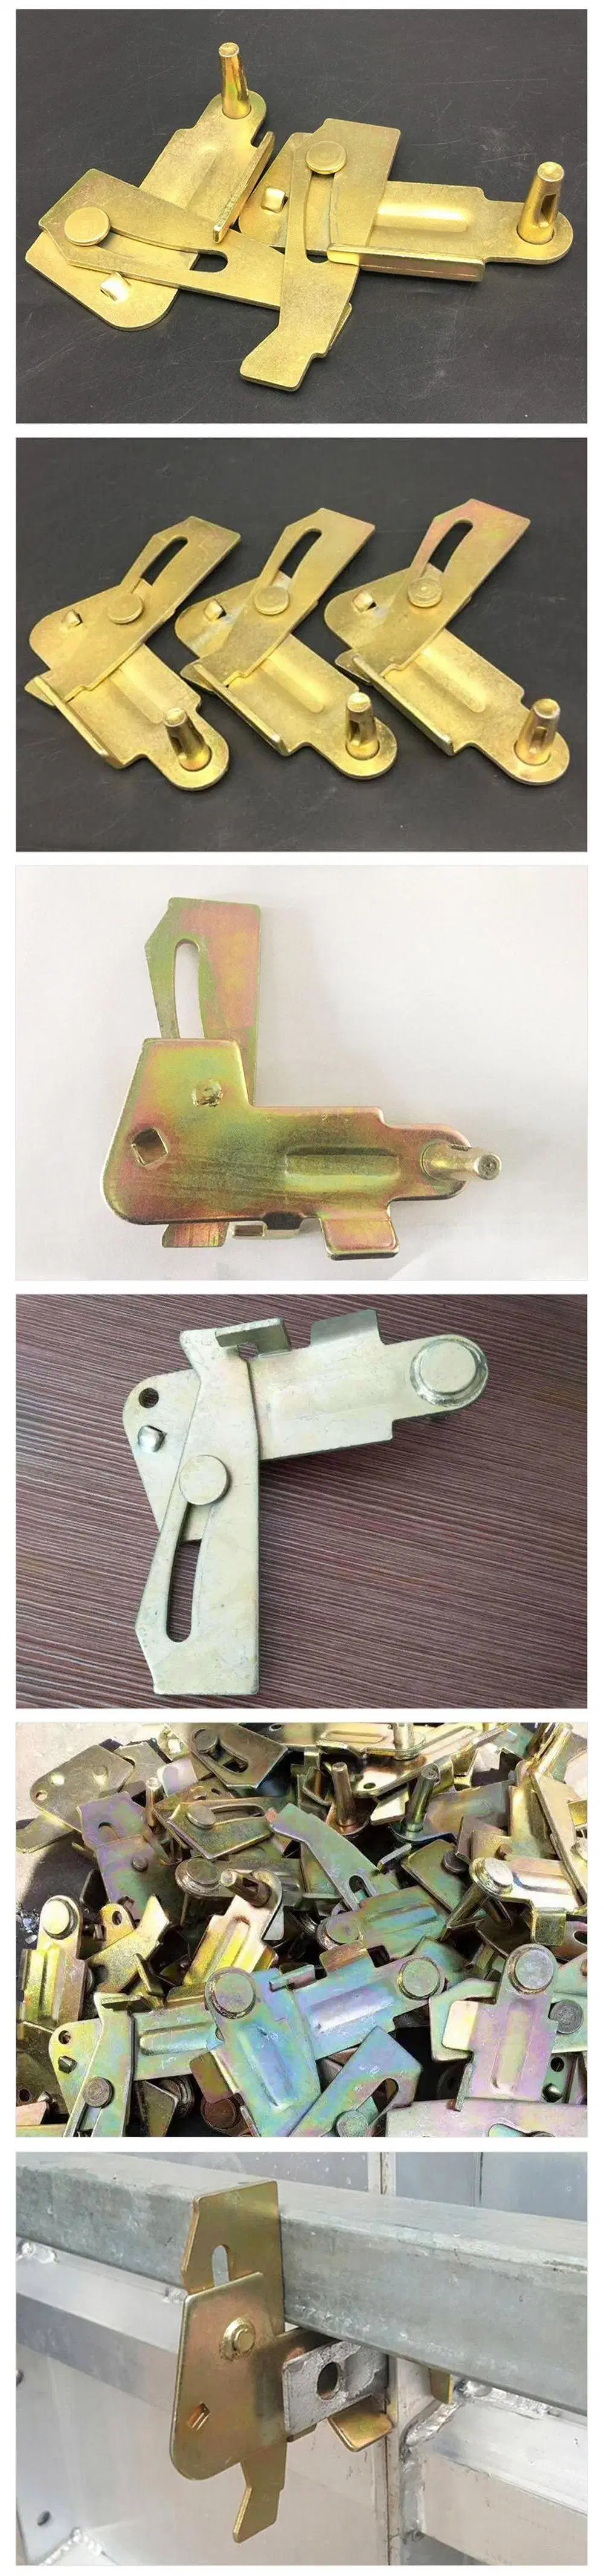 Adjustable Aluminum Formwork System Zinc Plated Square Pipe Buckle Waler Clamp